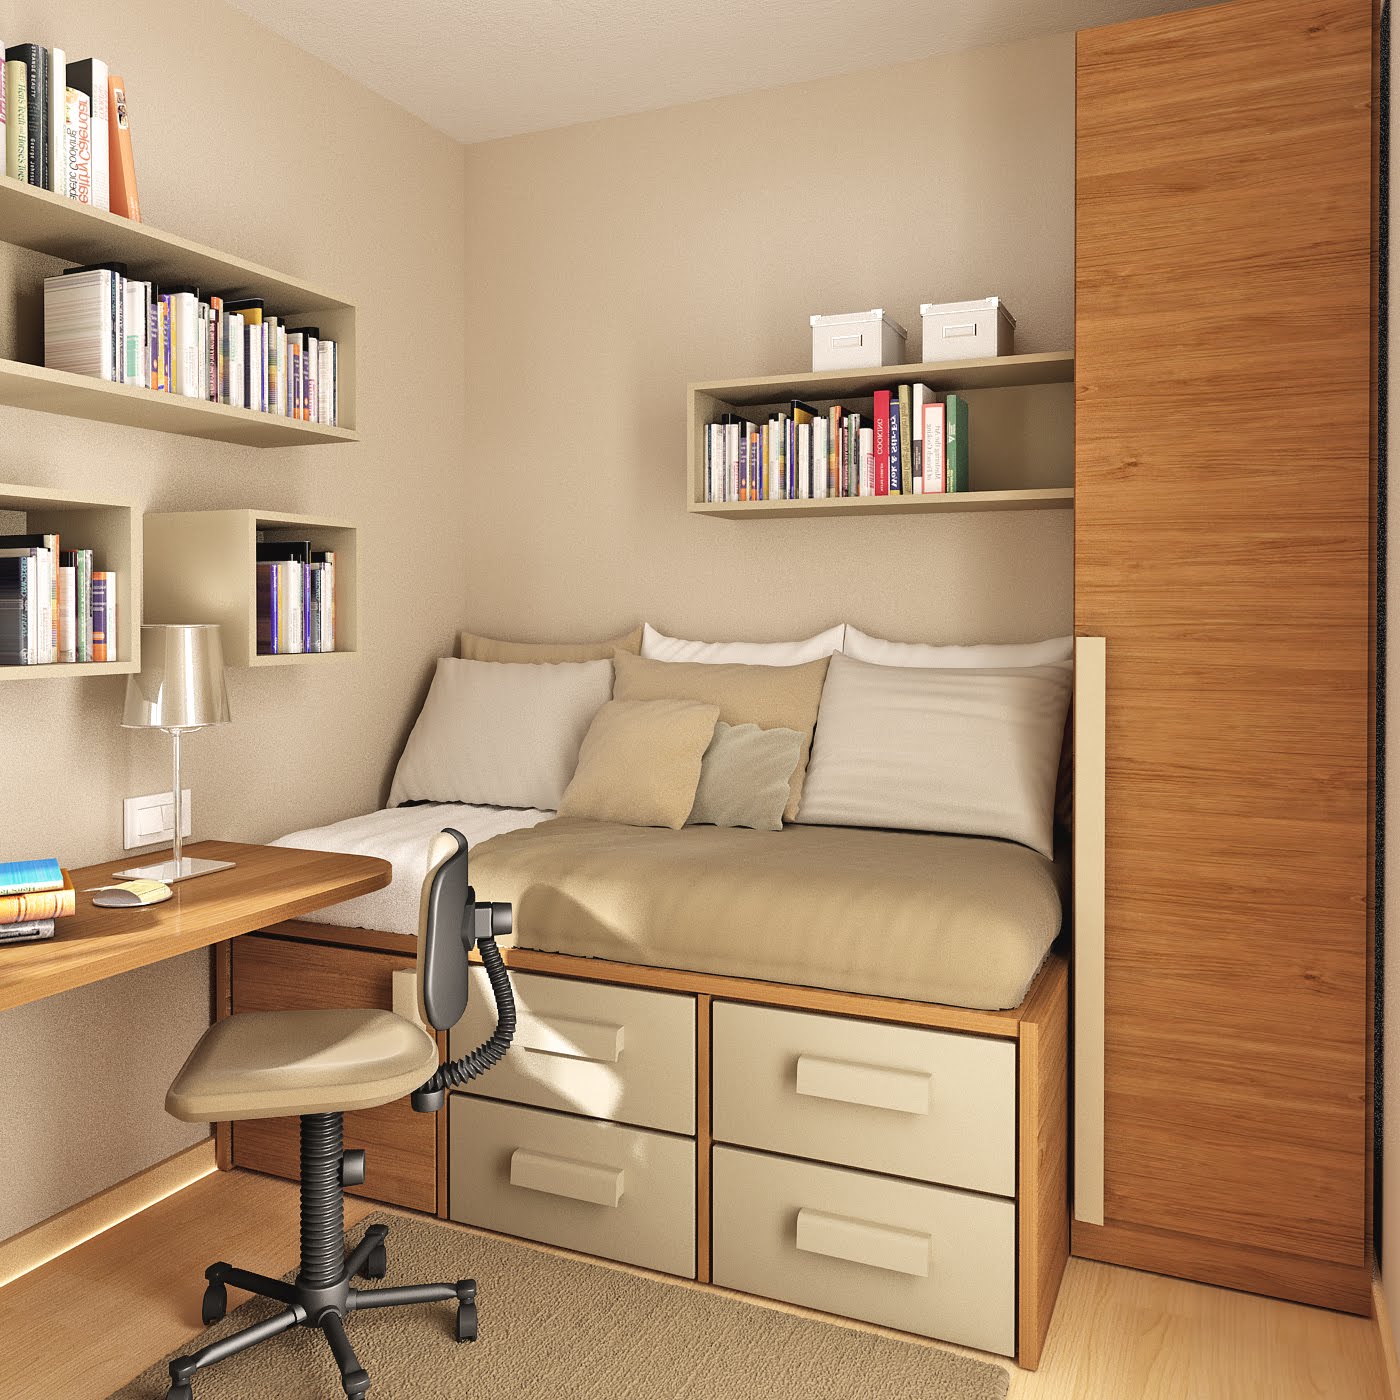 Study Room Design Pictures | Dreams House Furniture